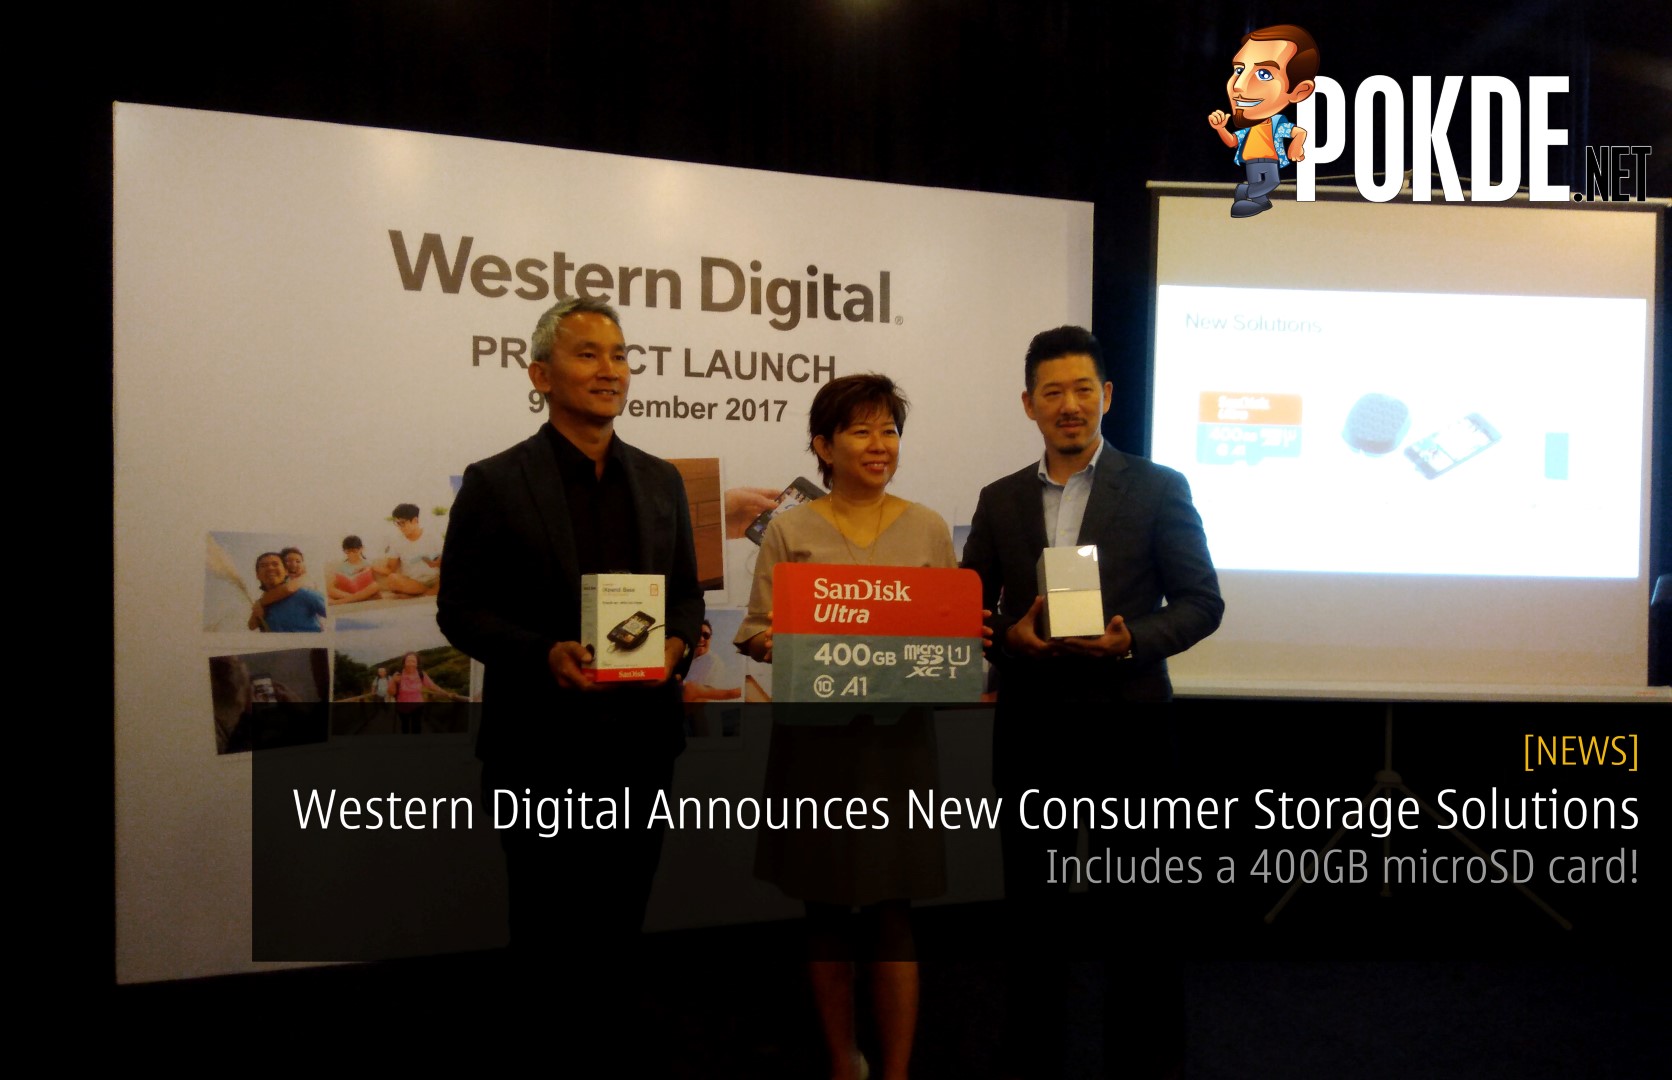 Western Digital Announces New Consumer Storage Solutions - Includes a 400GB microSD card! 20